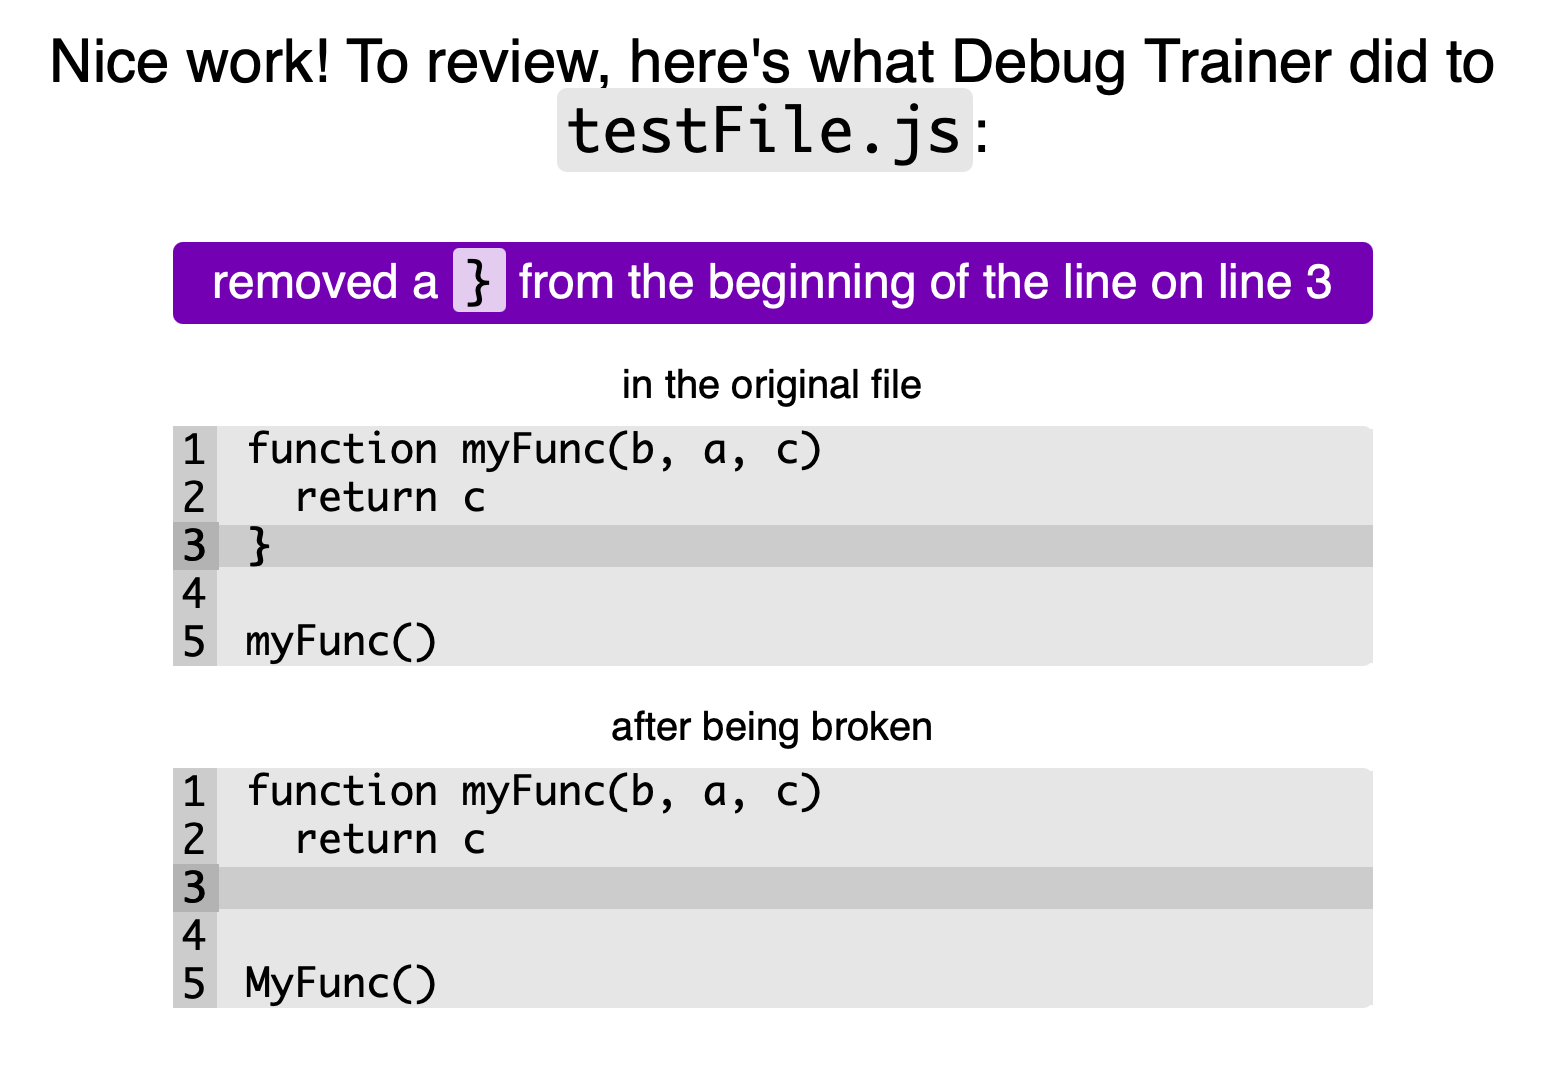 the very last part of the app, showing what all of the bugs were. In this example, the app explains that it “removed a `}` from the beginning of the line on line 3”, and shows “before” and “after” versions of line 3